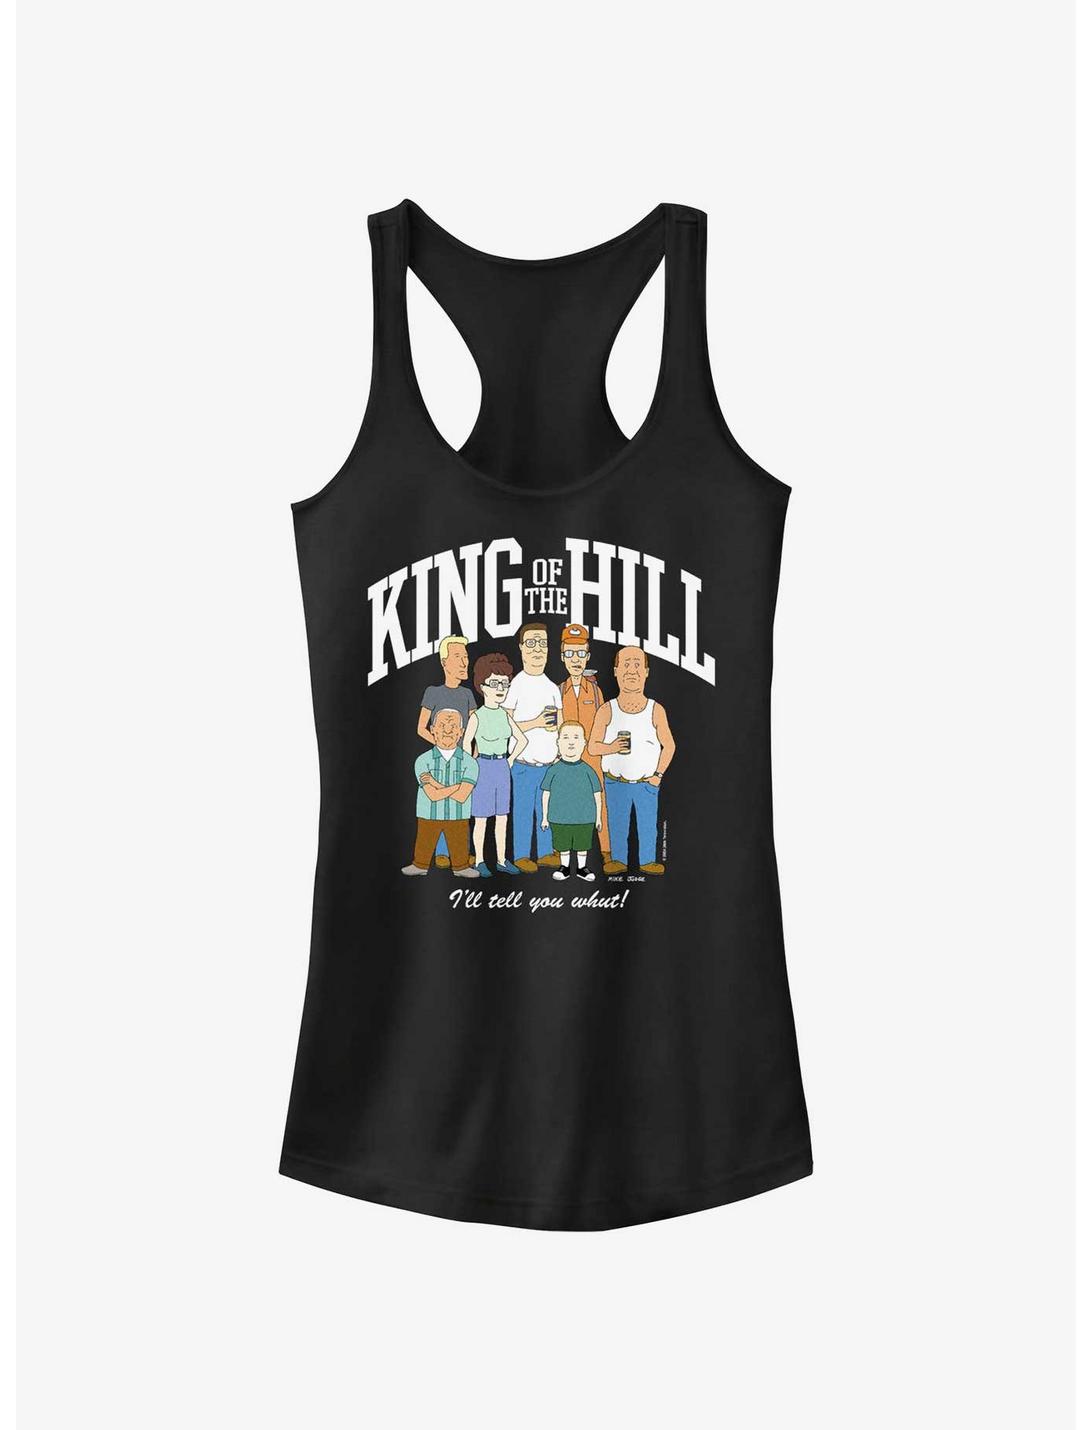 King of the Hill Group Girls Tank, BLACK, hi-res